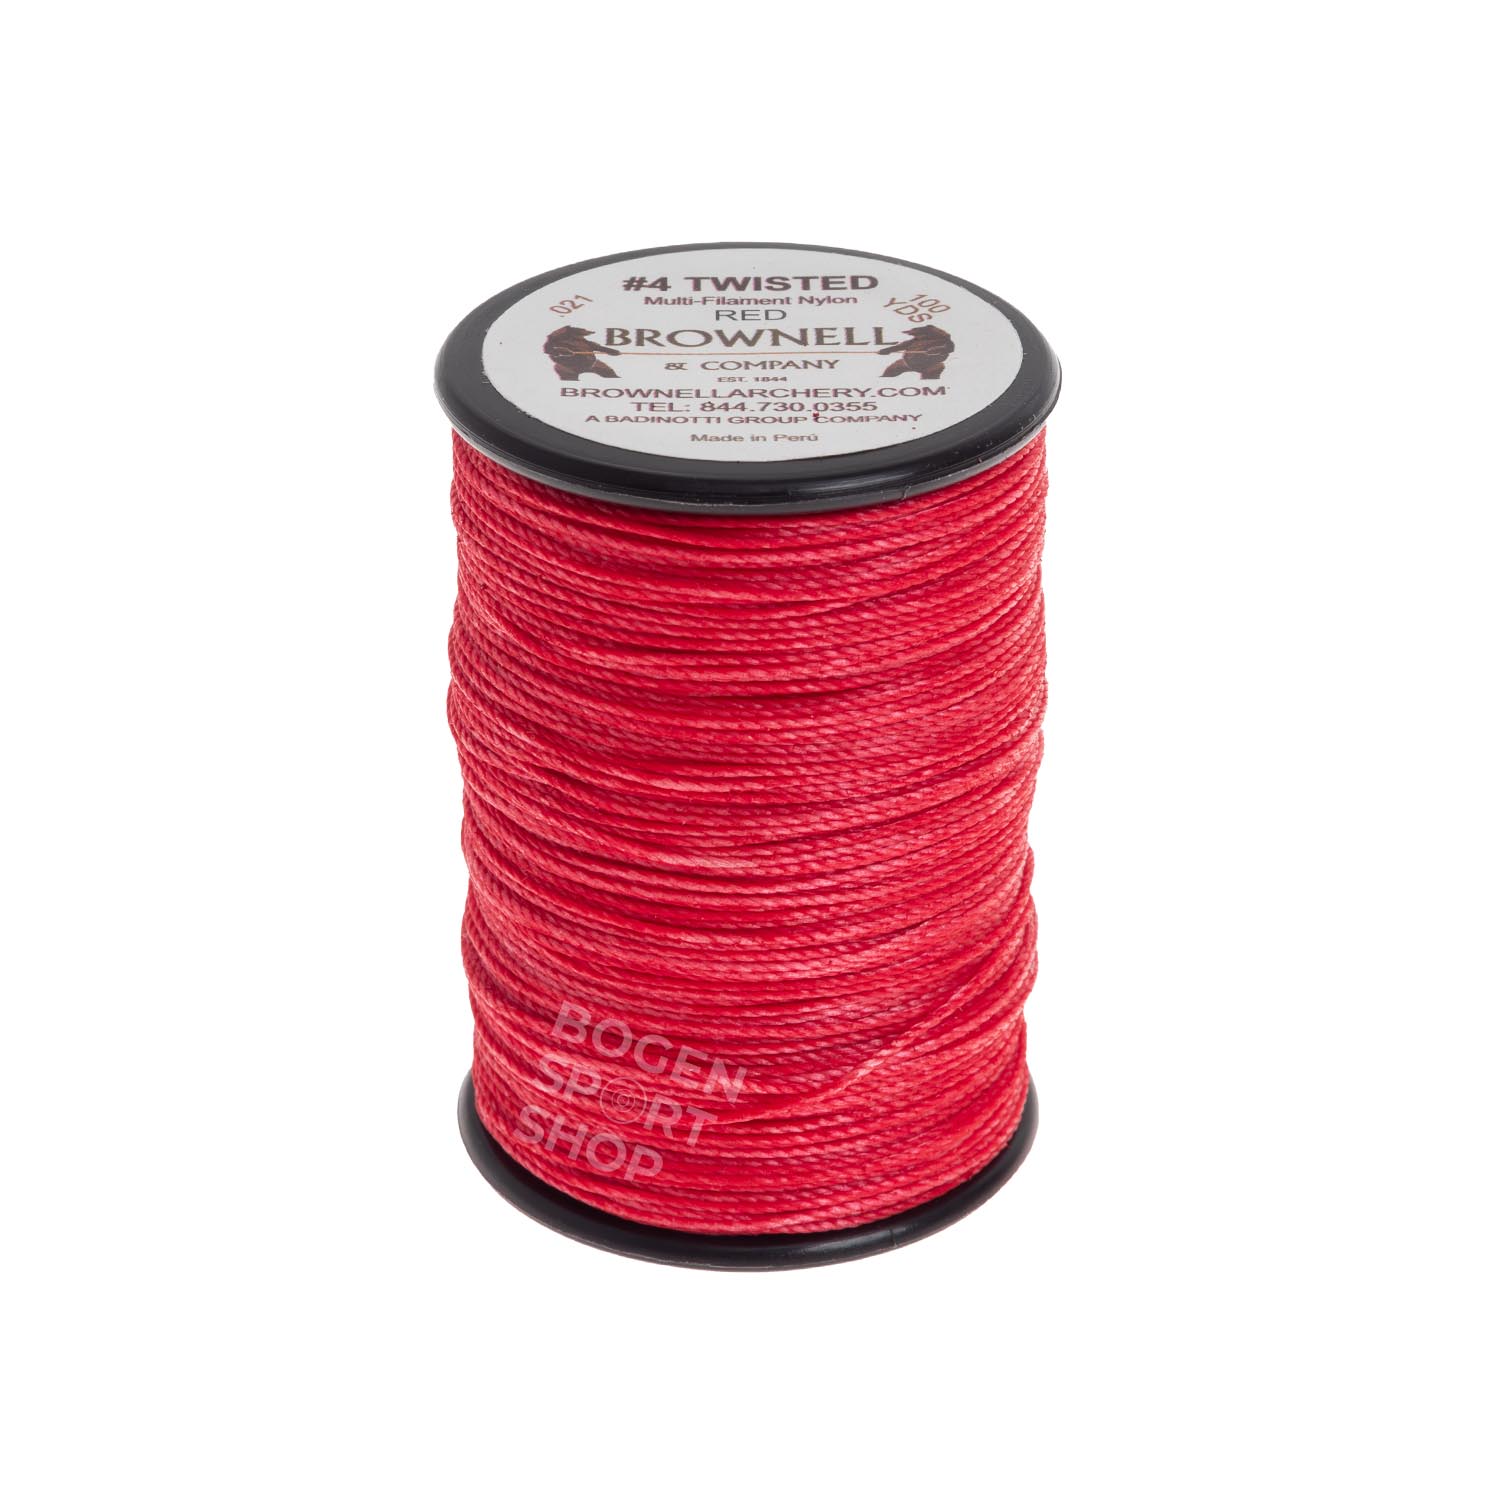 Natural Twisted Nylon Twine - Brownell Twines